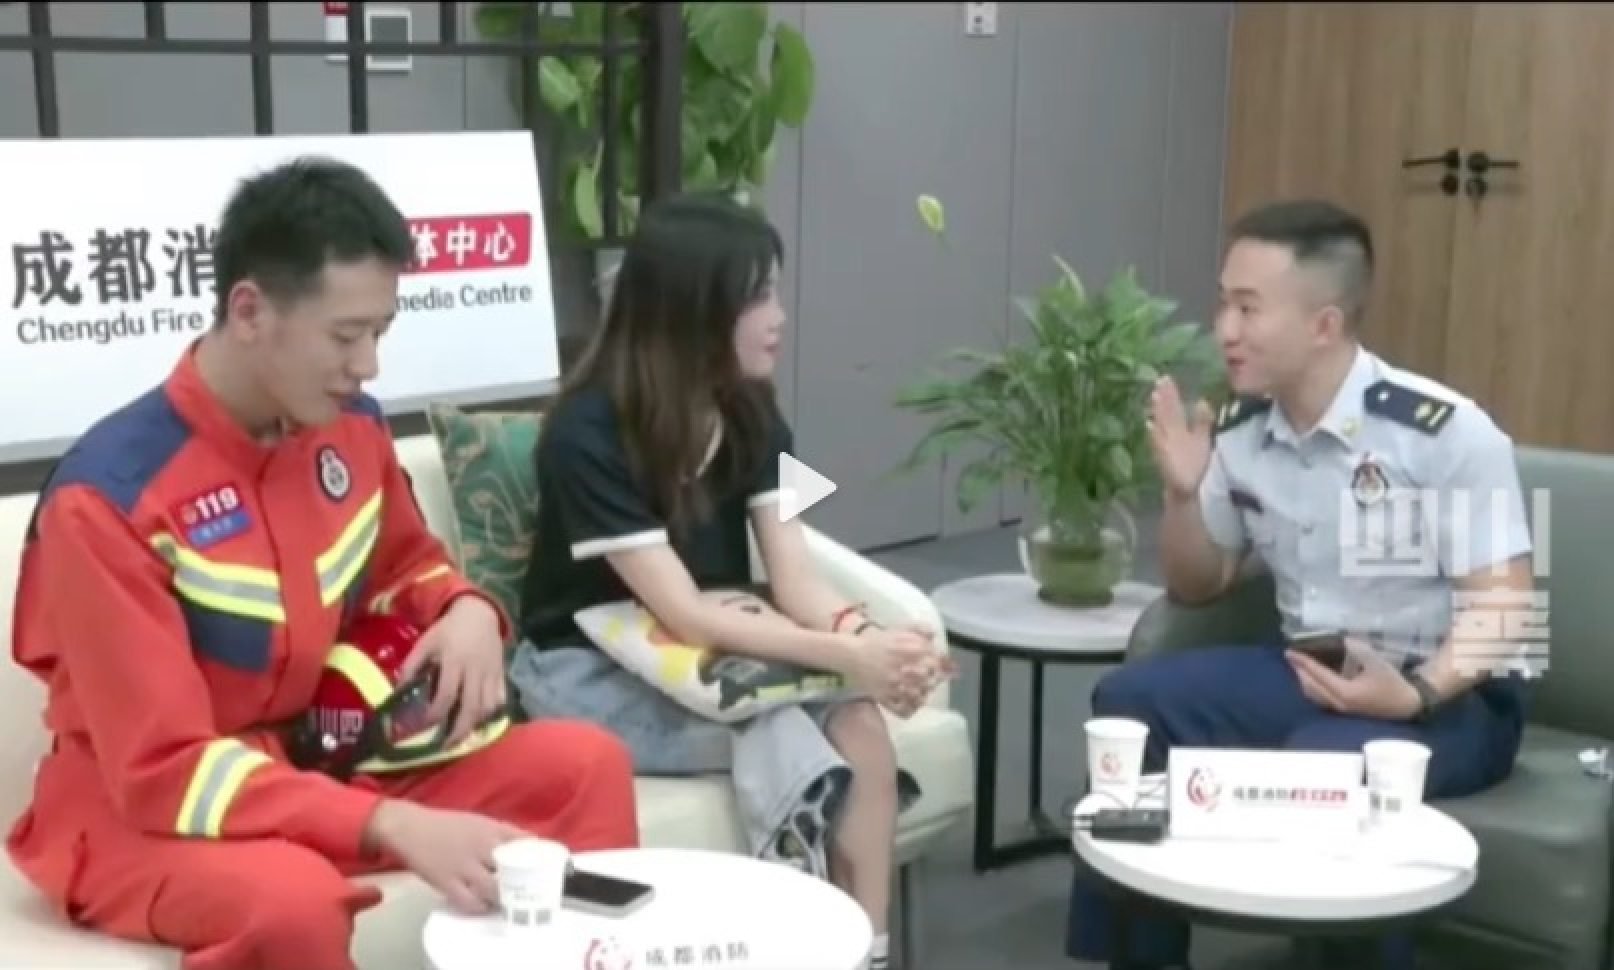 The couple tell their emotional story, which has gone viral online, in an interview. Photo: Weibo